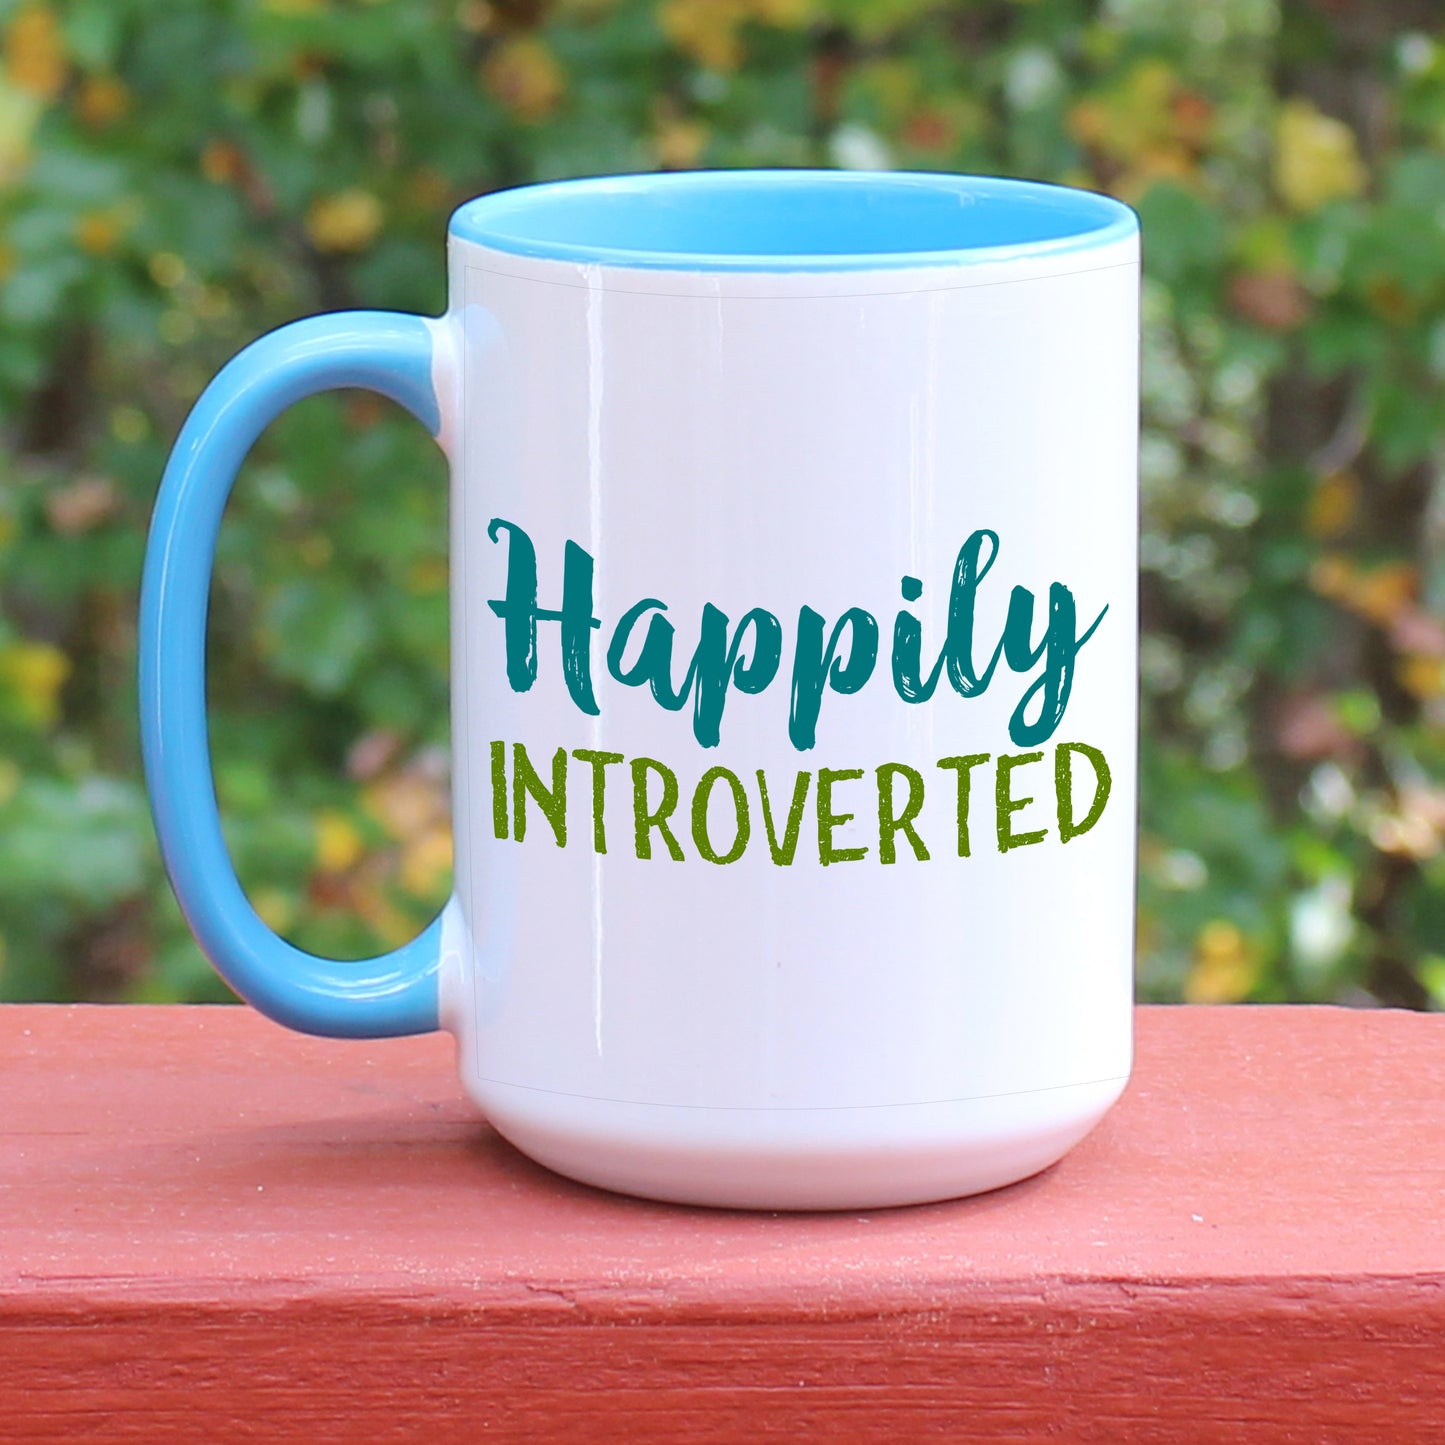 Happily Introverted ceramic coffee mug with blue handle